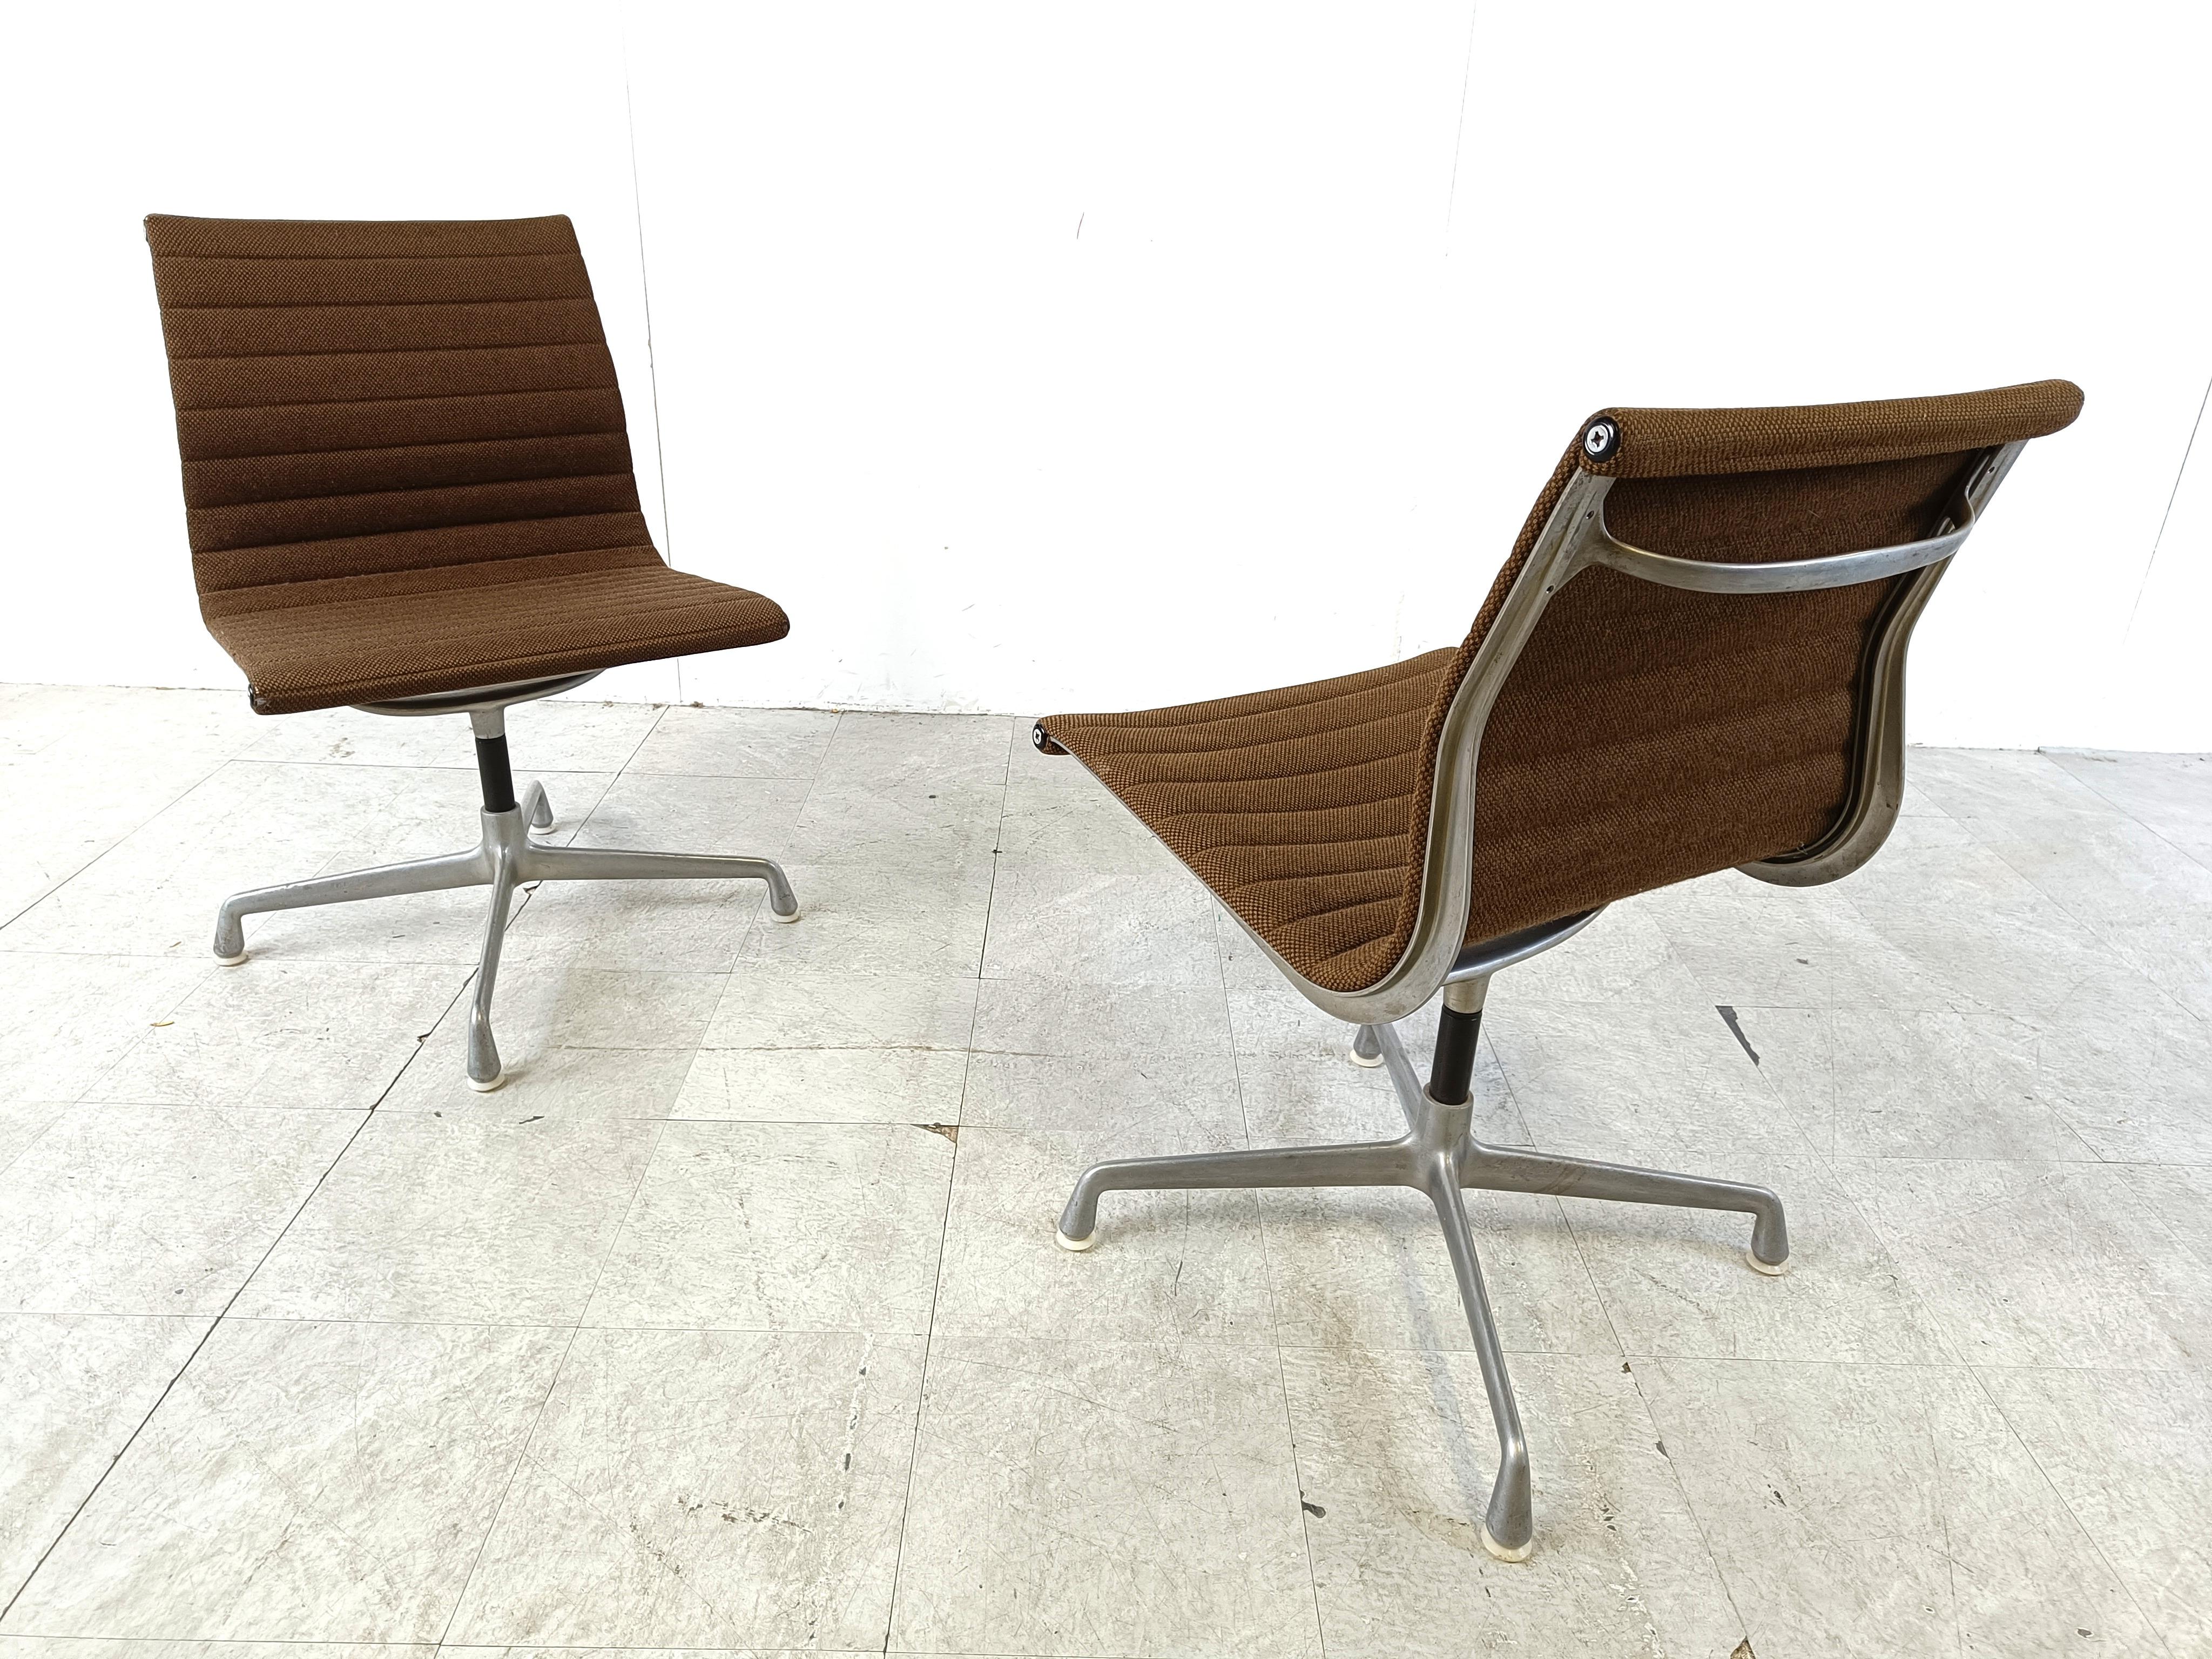 Vintage eames swivel/desk chair ea108 in brown fabric upholstery on an aluminum base.

Good condition

Labelled 'Herman Miller'

1970s - USA

Dimensions: 
Height: 85cm
Width: 52cm
Depth: 60cm
Seat  height: 47cm

Ref.: 302020

*Price is for the pair